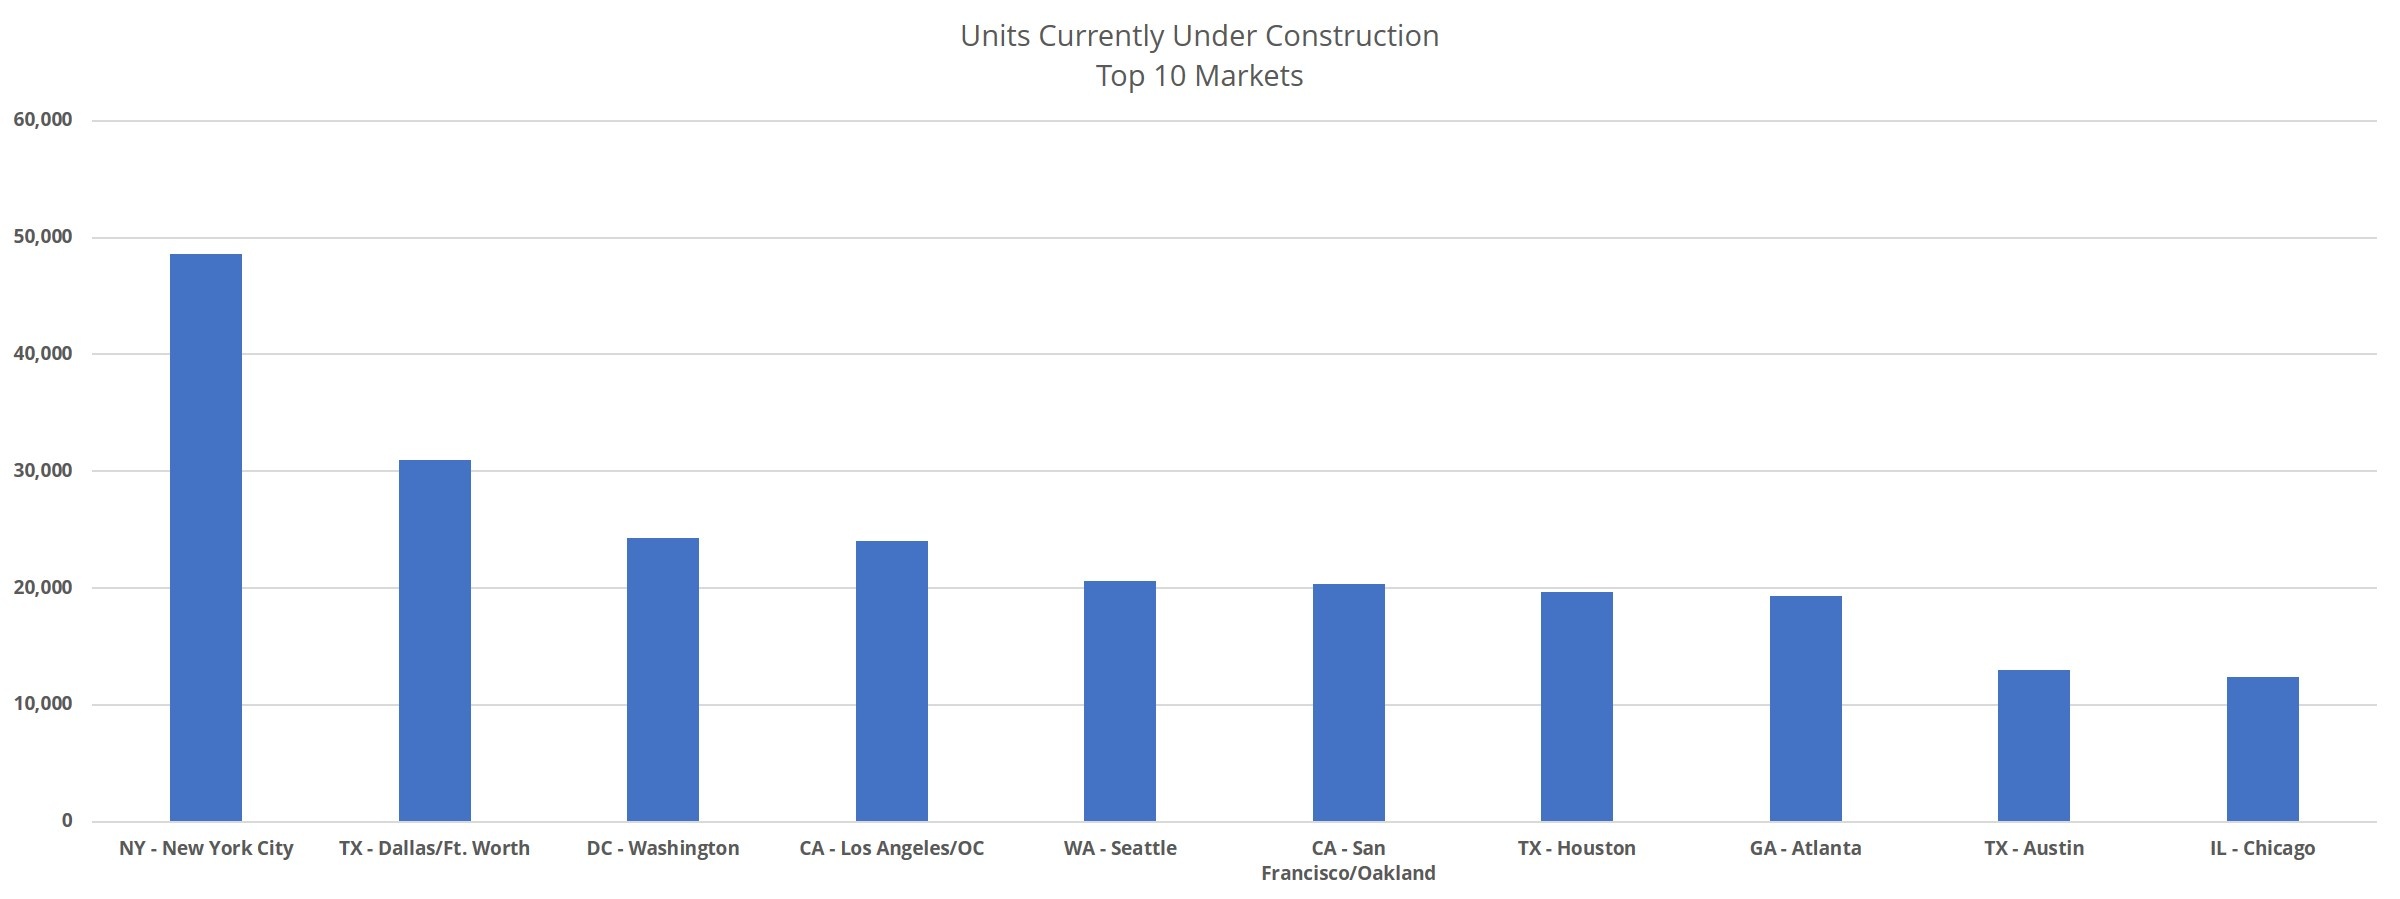 Top Ten Markets Units Currently Under Construction